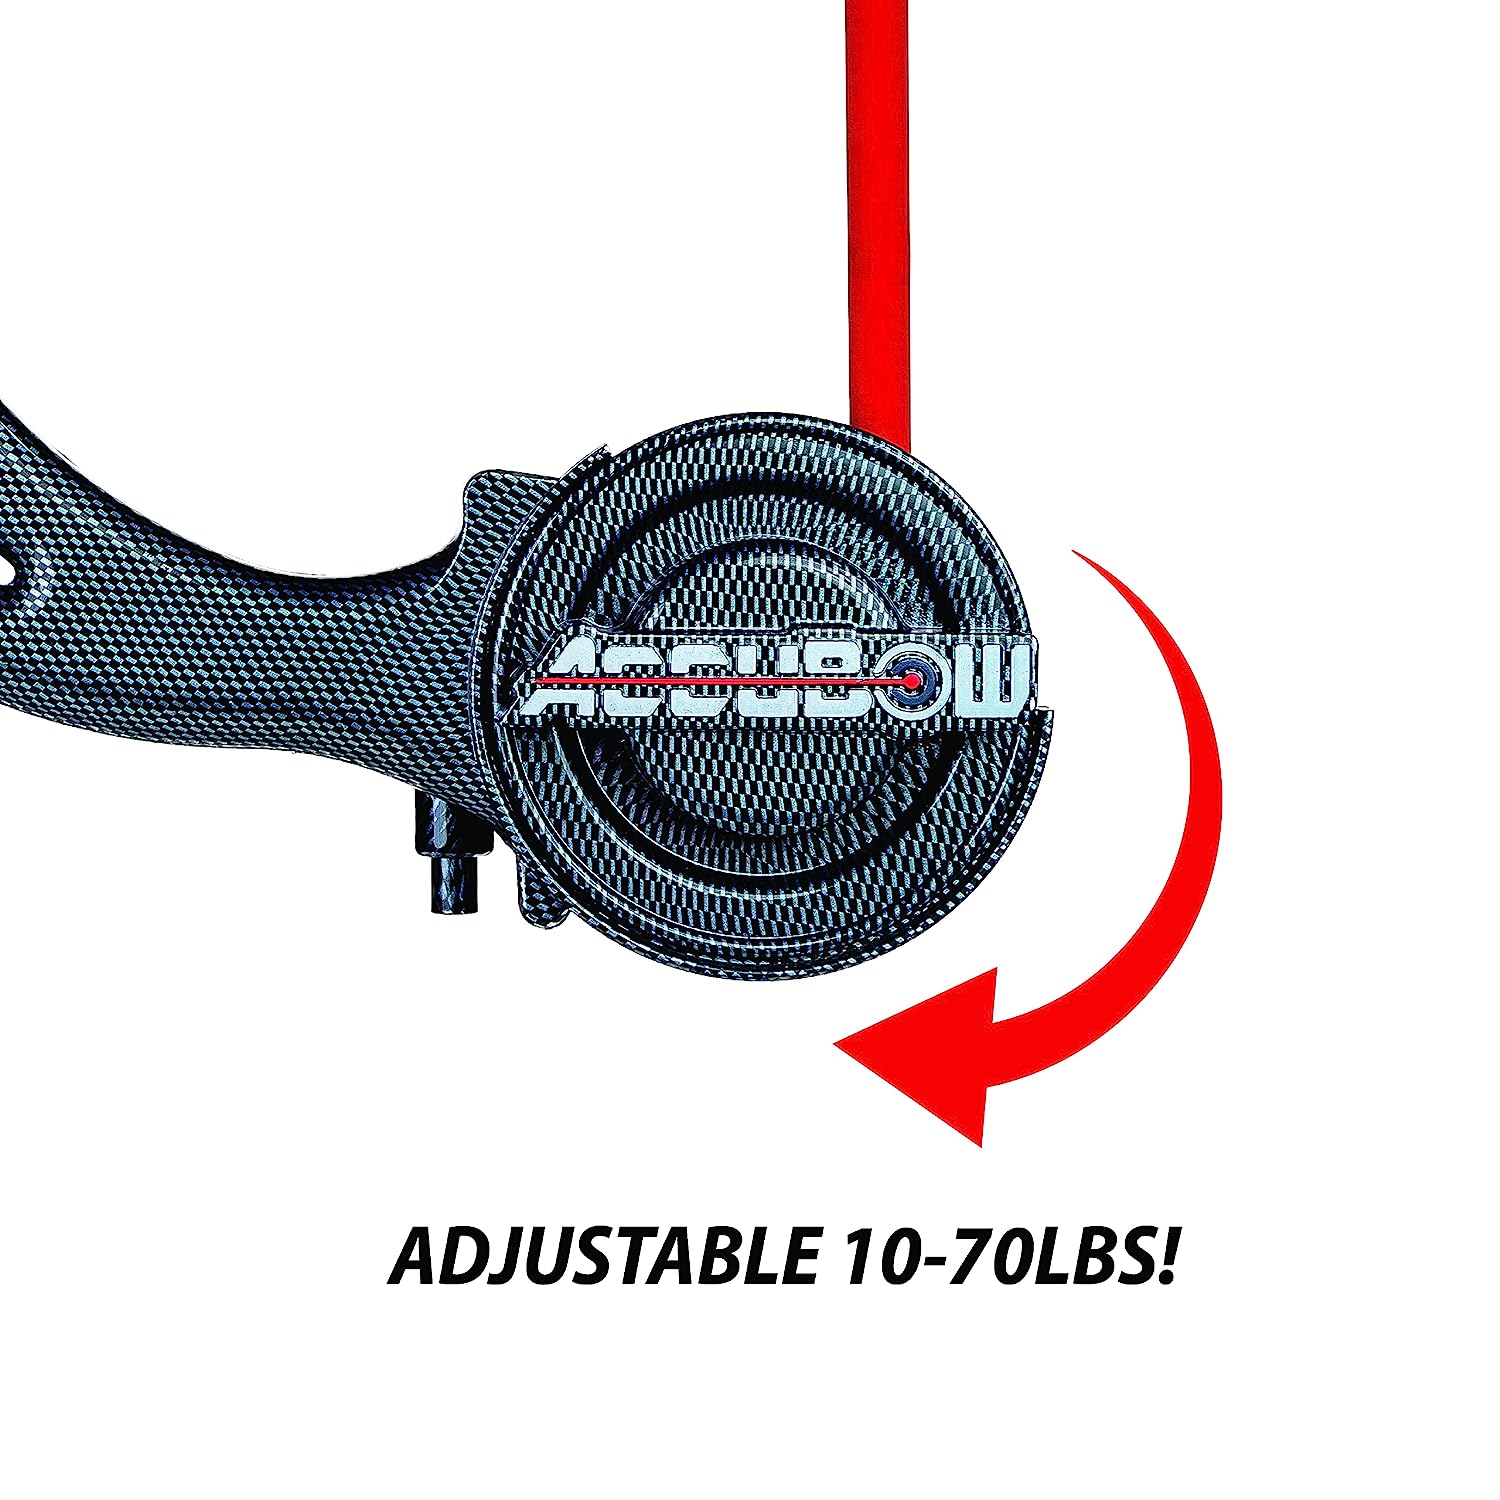 Accubow 2.0 Carbon Fiber Original Archery Strength And Exercise Training System